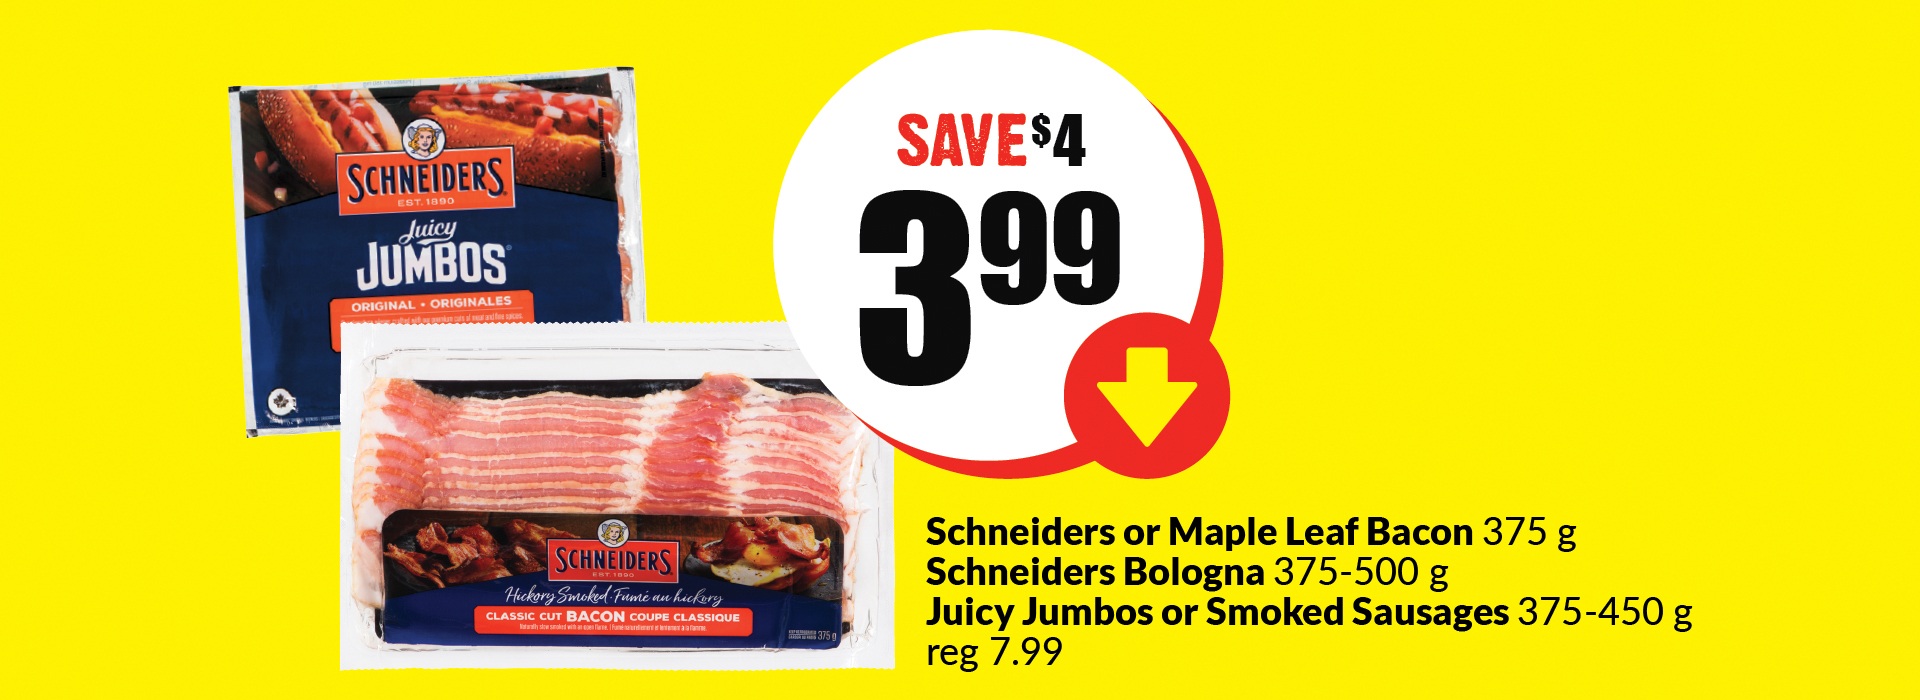 The following image contains the text," Schneiders or maple leaf bacon 375 g, Schneiders bologna 375- 500g, Juicy jumbos or smoked sausages 375-450 g reg 7.99. Get them at just $3.99 and save $4."